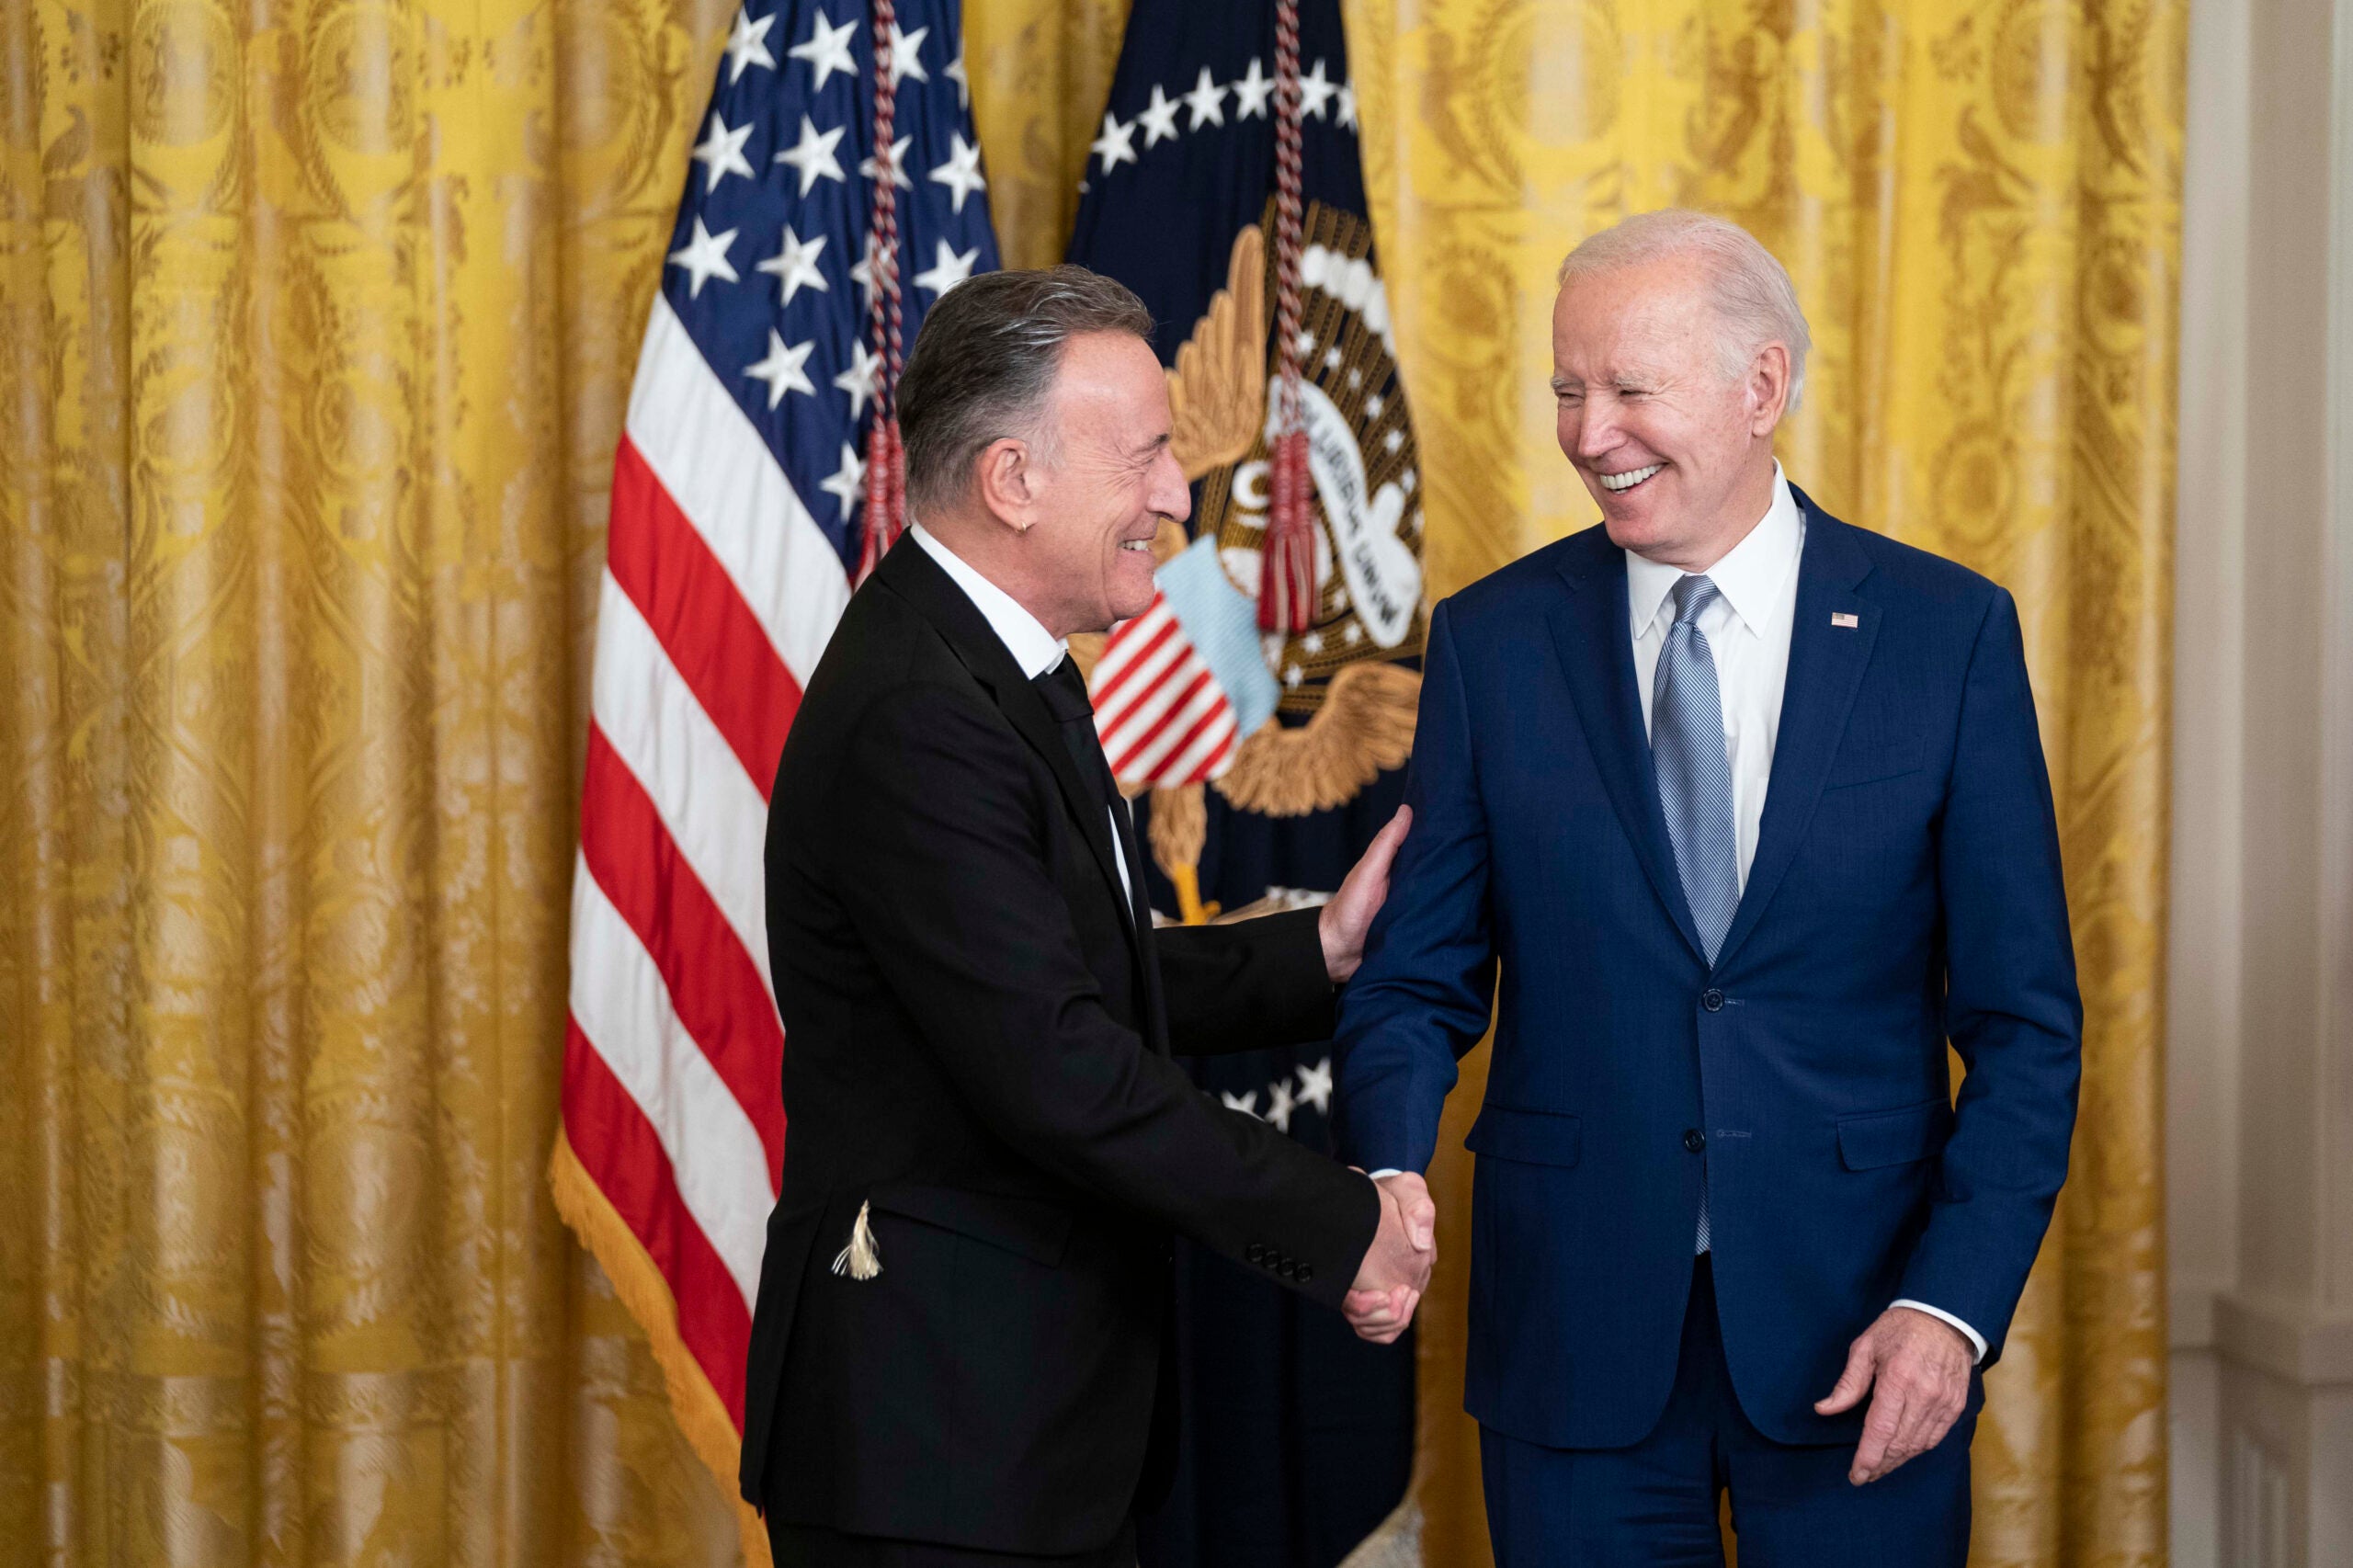 President Joe Biden presents Bruce Springsteen with a National Medal of Arts medal during a ceremony in the East Room at the White House on Tuesday.